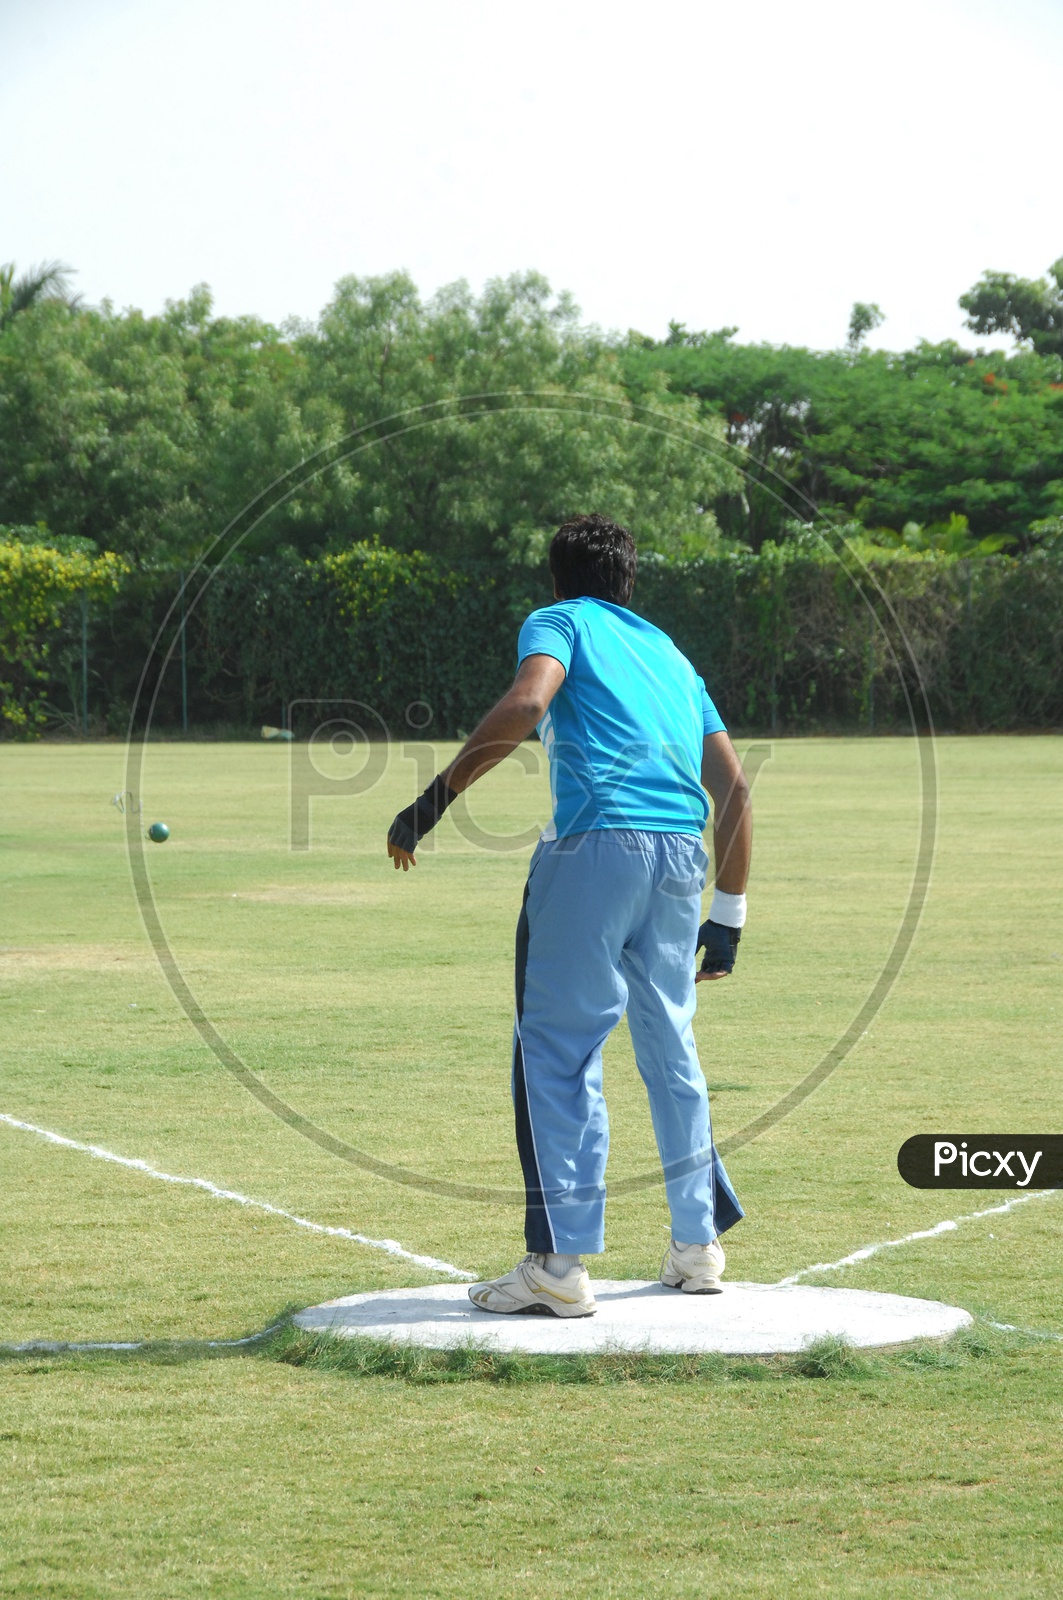 Shot Put Practice By a Sports Man In a Ground